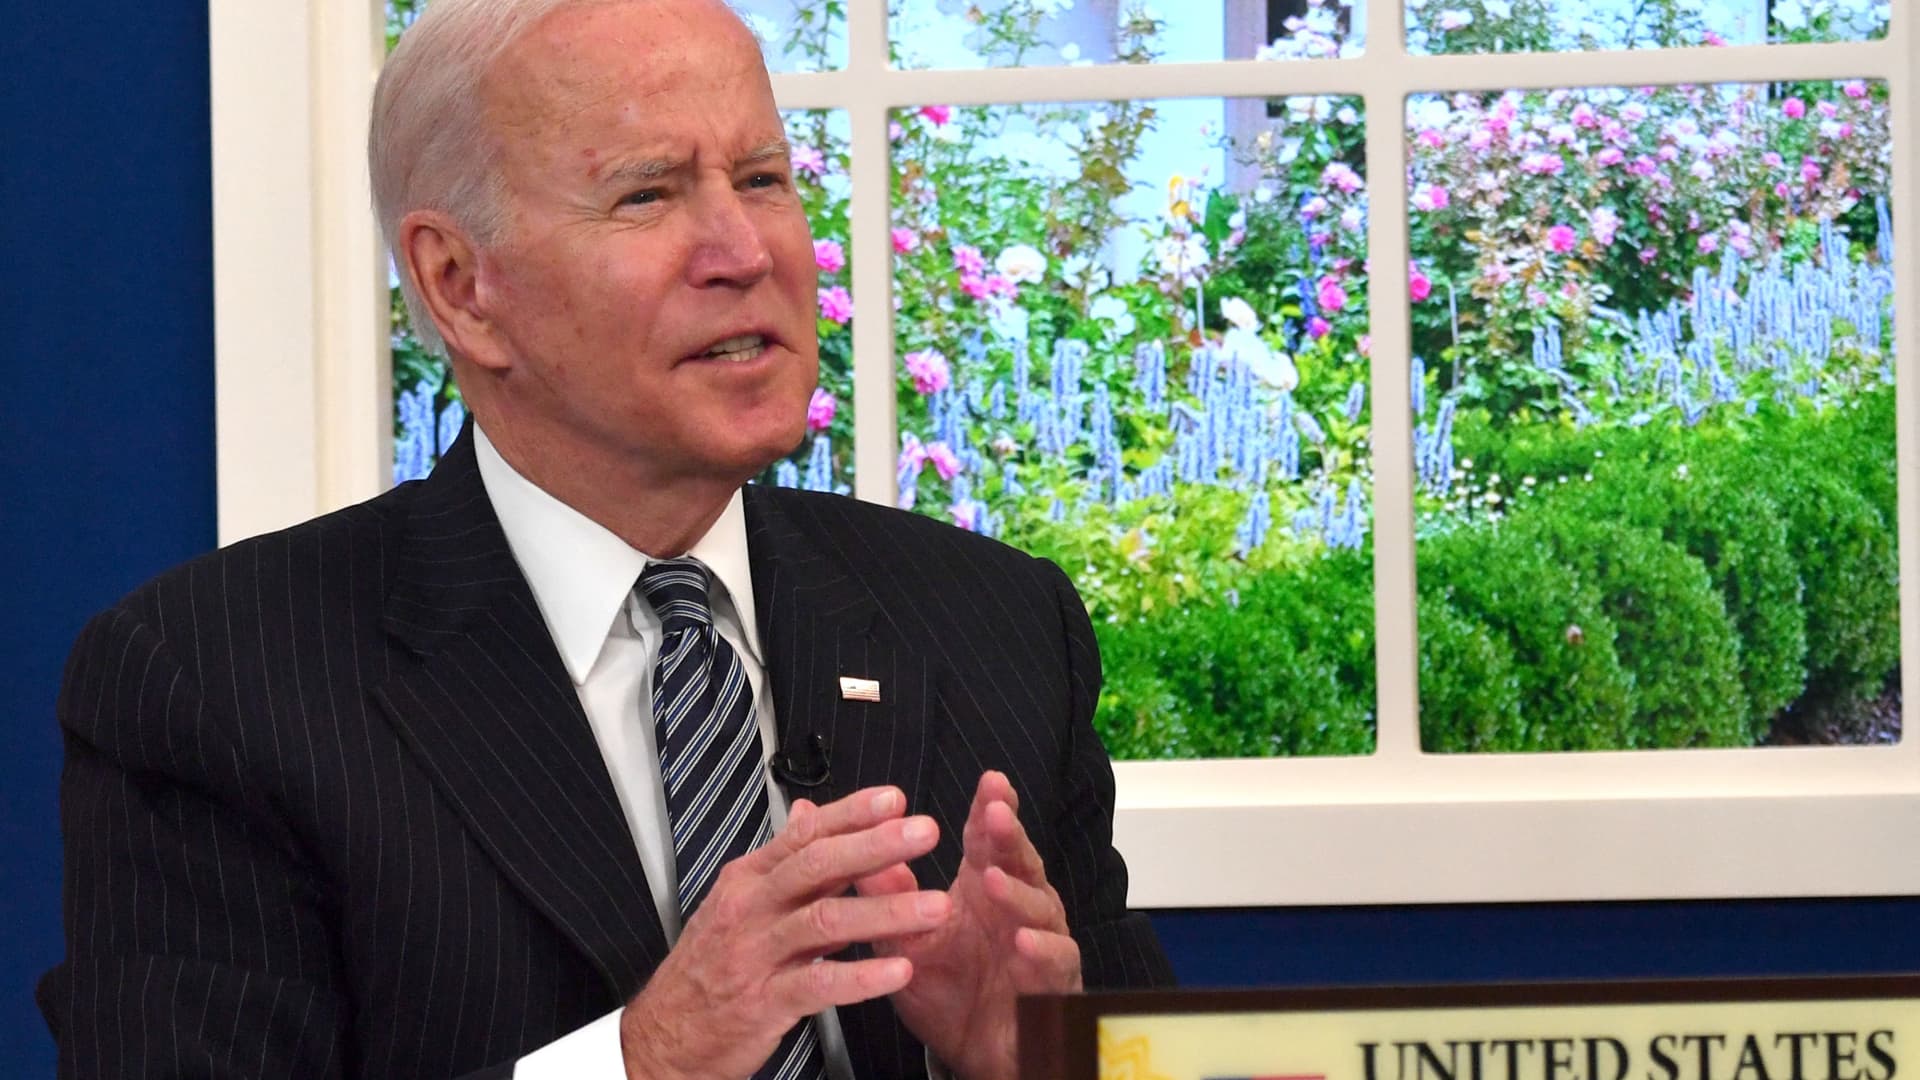 Biden hosts Southeast Asian leaders at the White House today. Here's what to expect